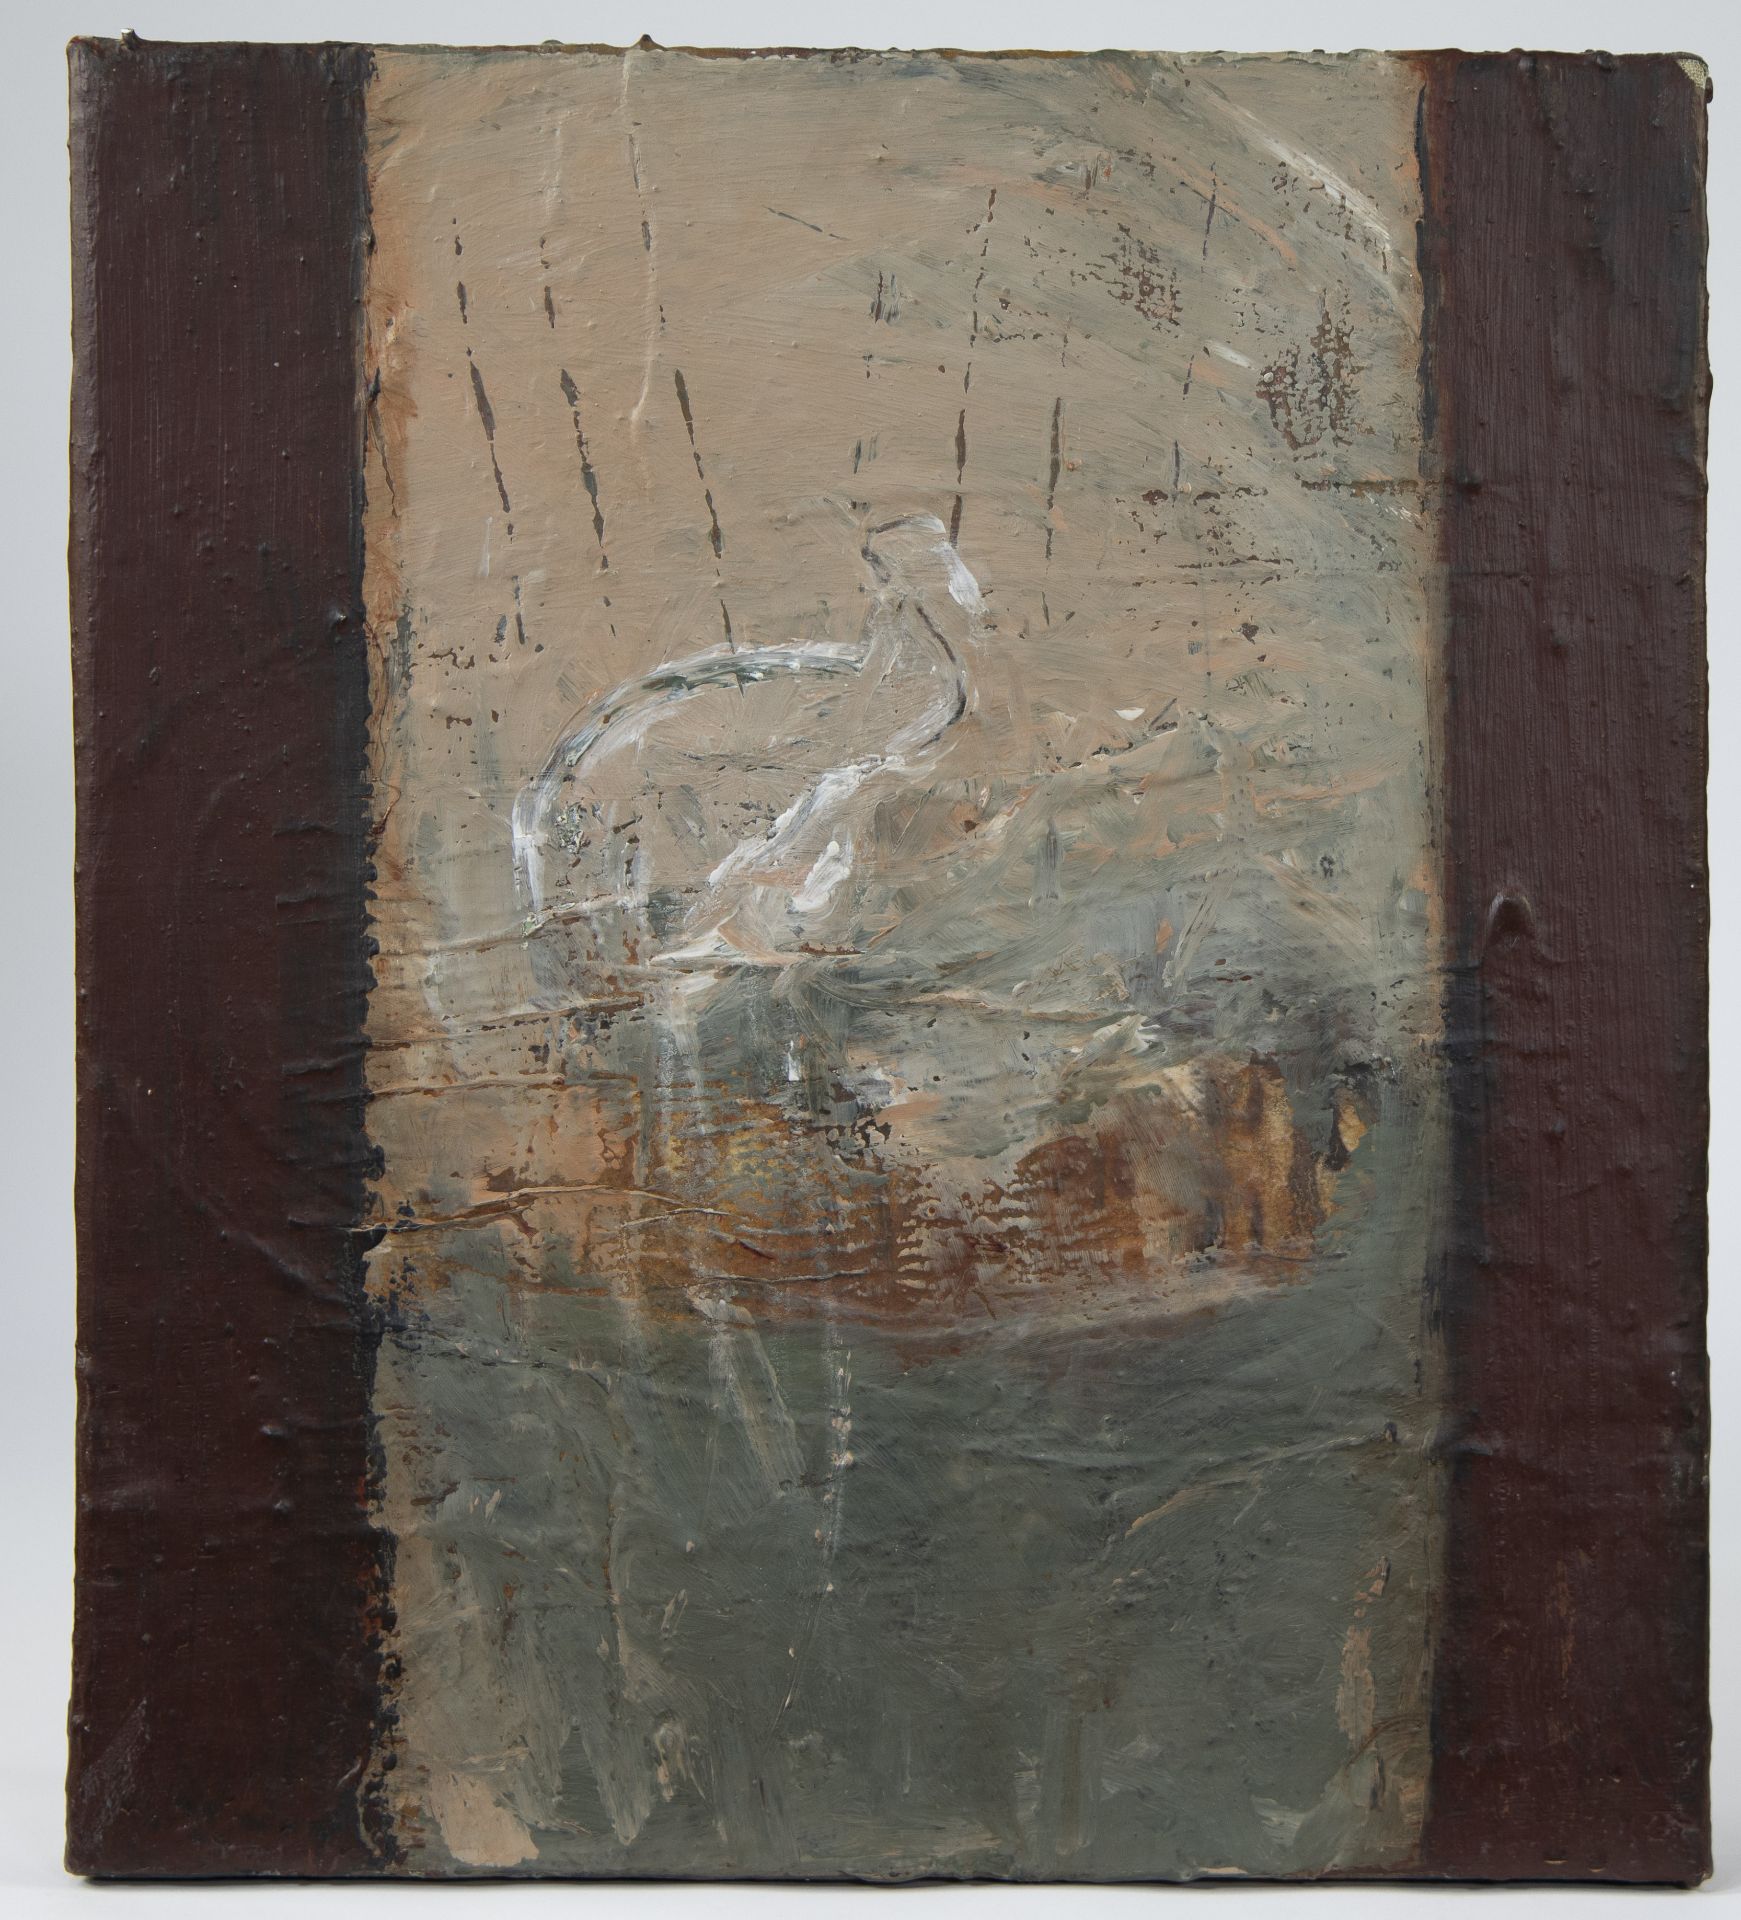 Gert VAN WEYENBERG (1966), oil on canvas Untitled, signed and dated 1993 verso - Image 2 of 4